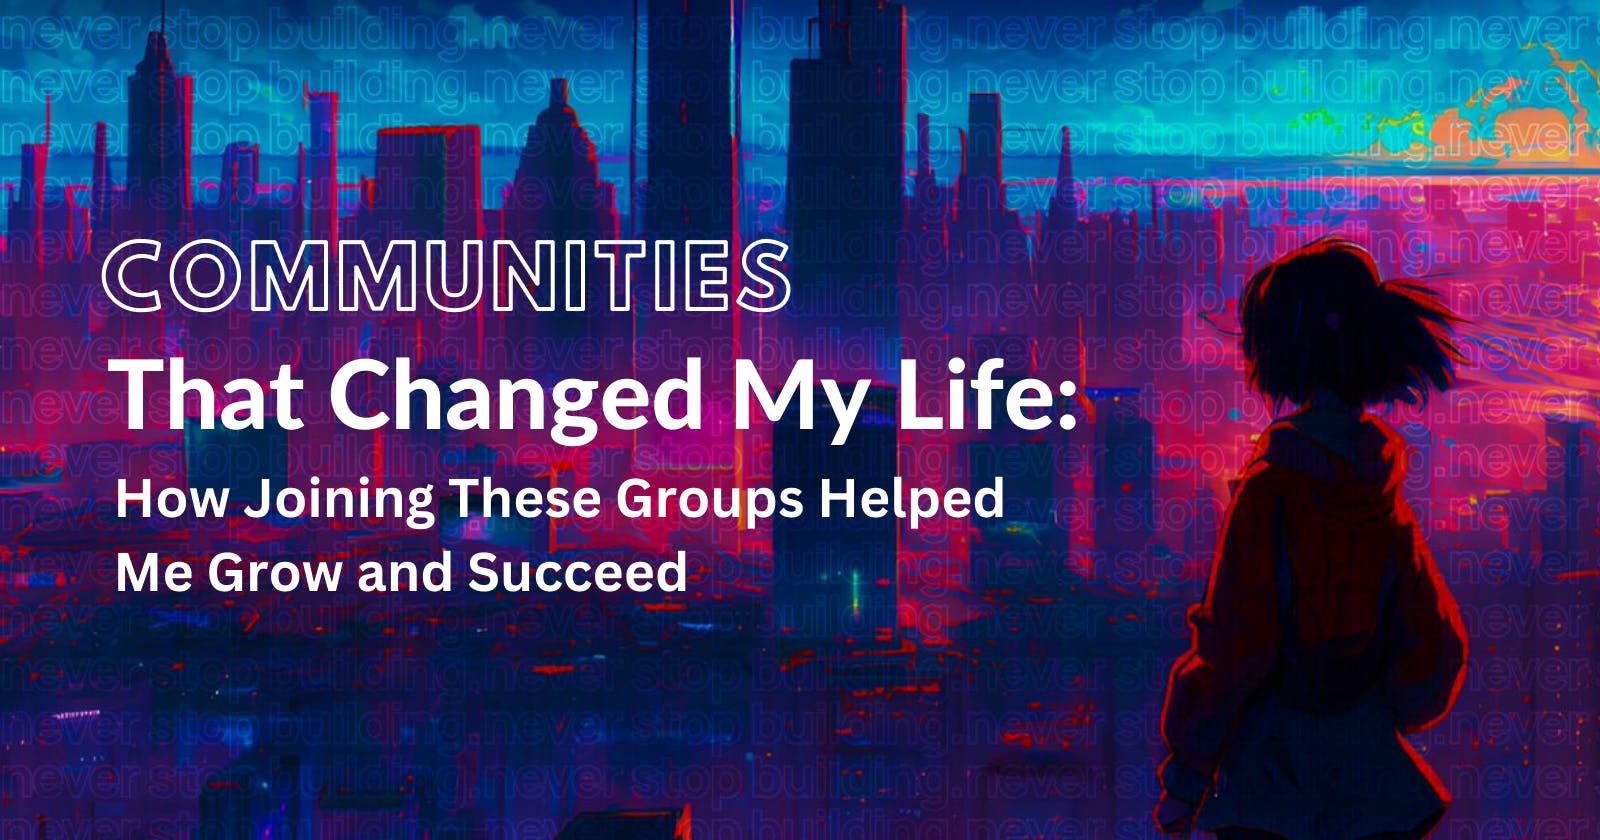 Communities that Changed My Life: How Joining These Groups Helped Me Grow and Succeed